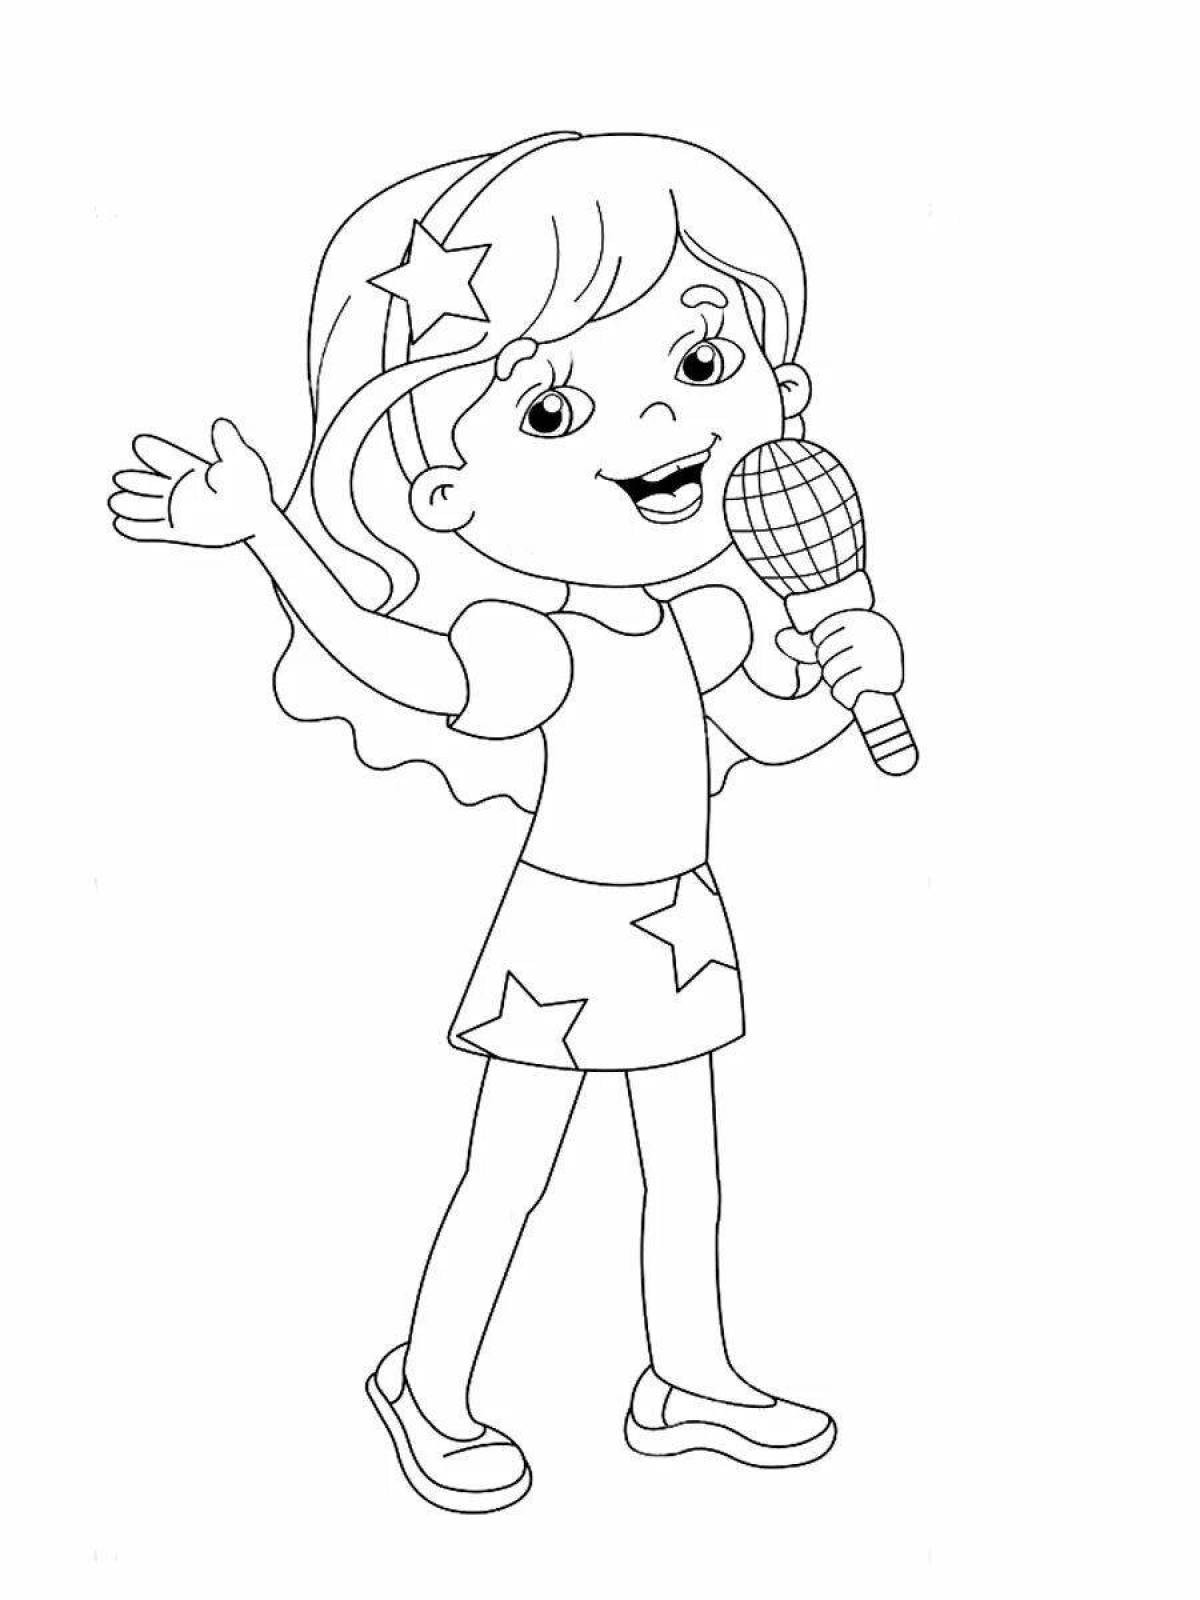 Exciting singer coloring book for kids